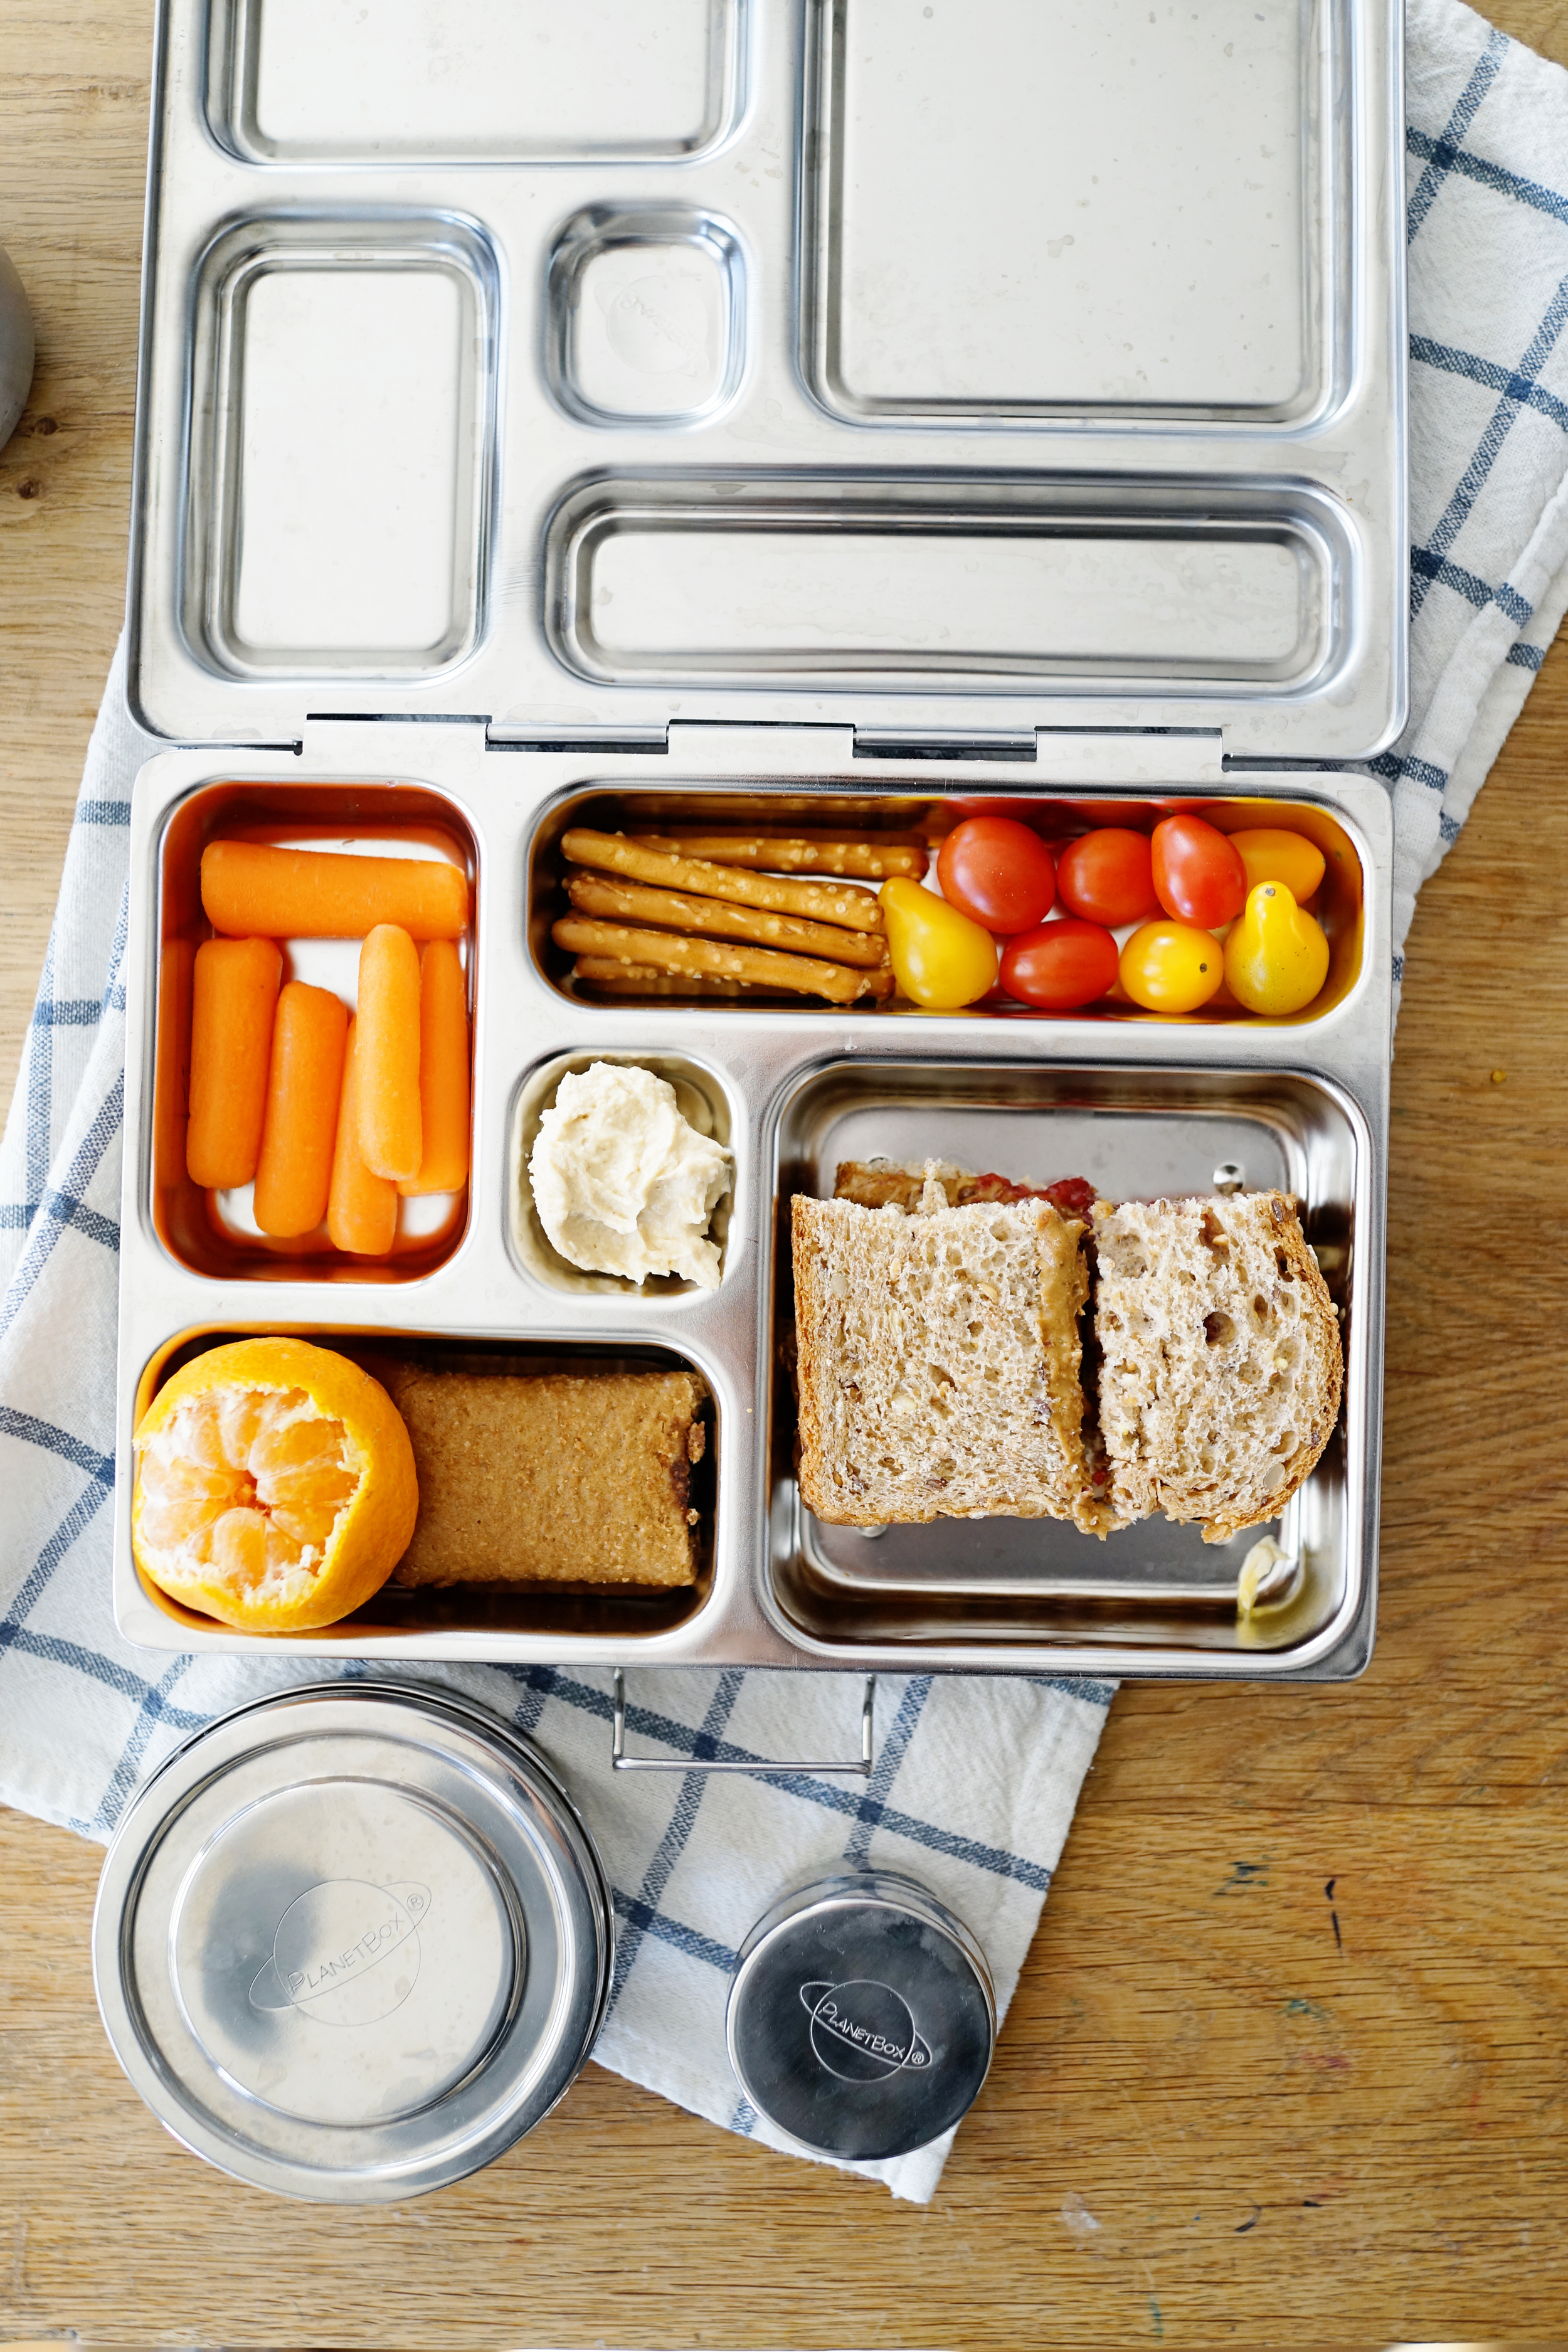 PlanetBox Rover Lunch Box — Good on Paper